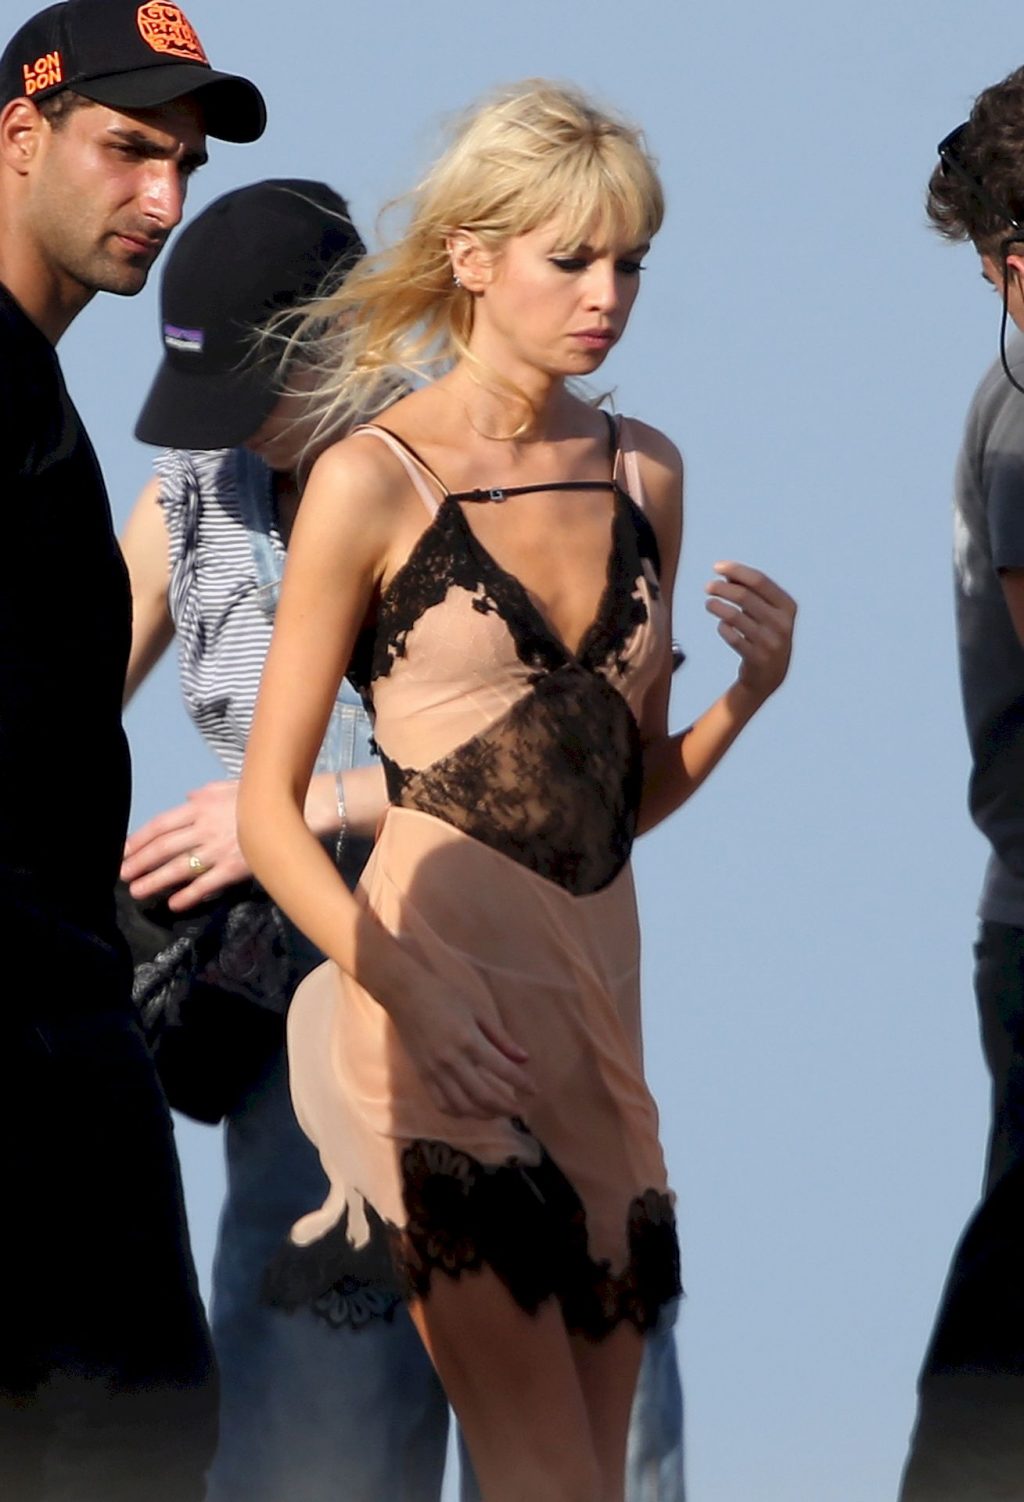 Stella Maxwell Wears Sheer Lingerie During a Photoshoot in Miami (36 Photos)